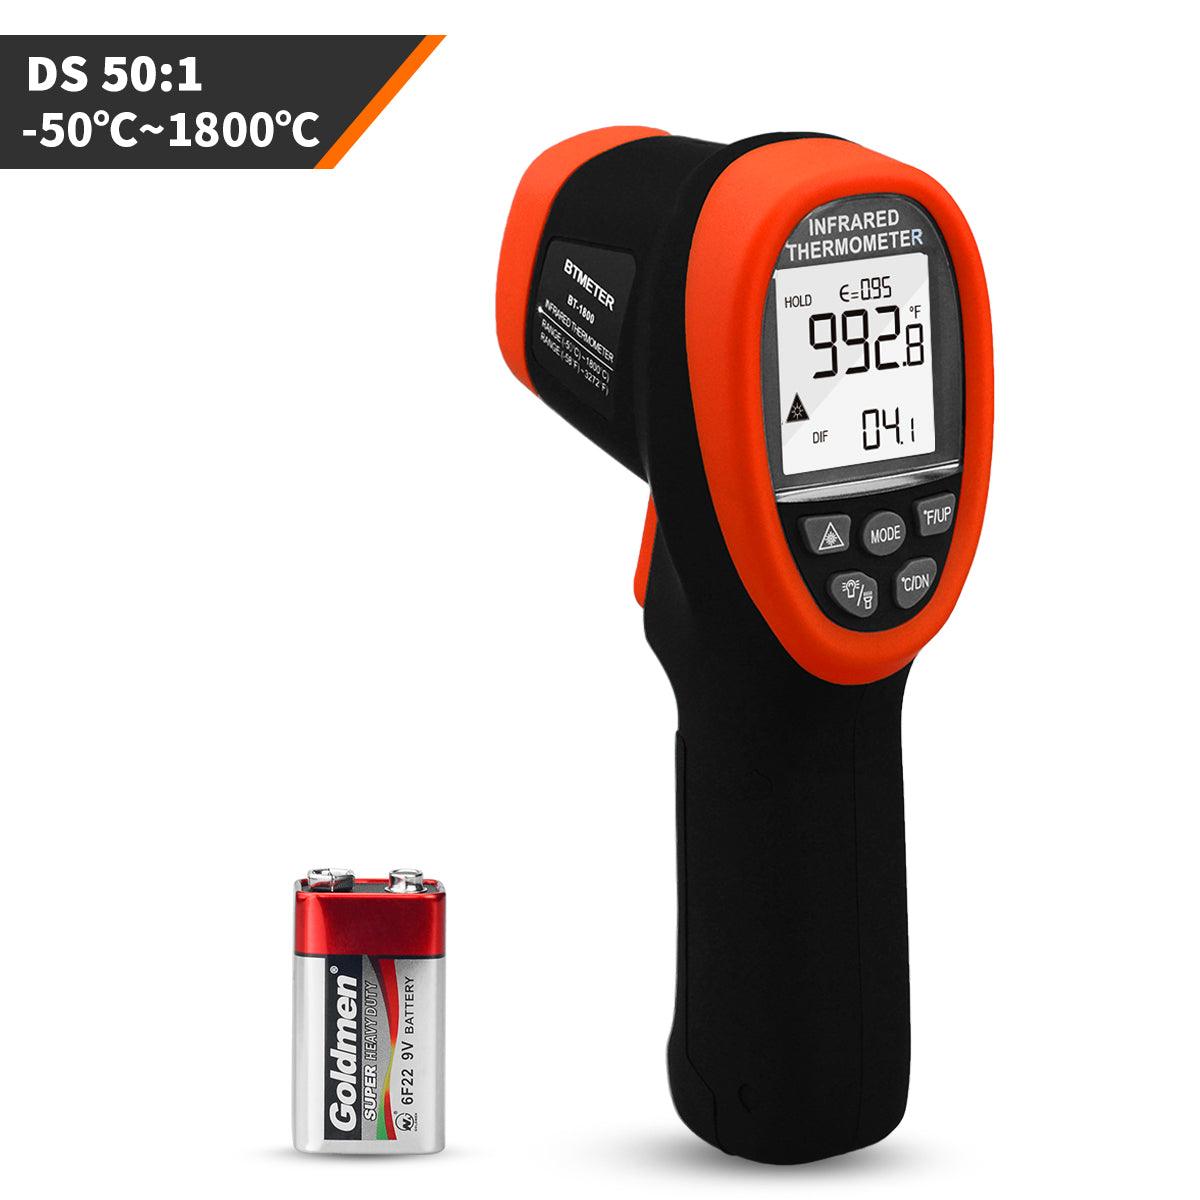 High Temperature Infrared Thermometer handheld